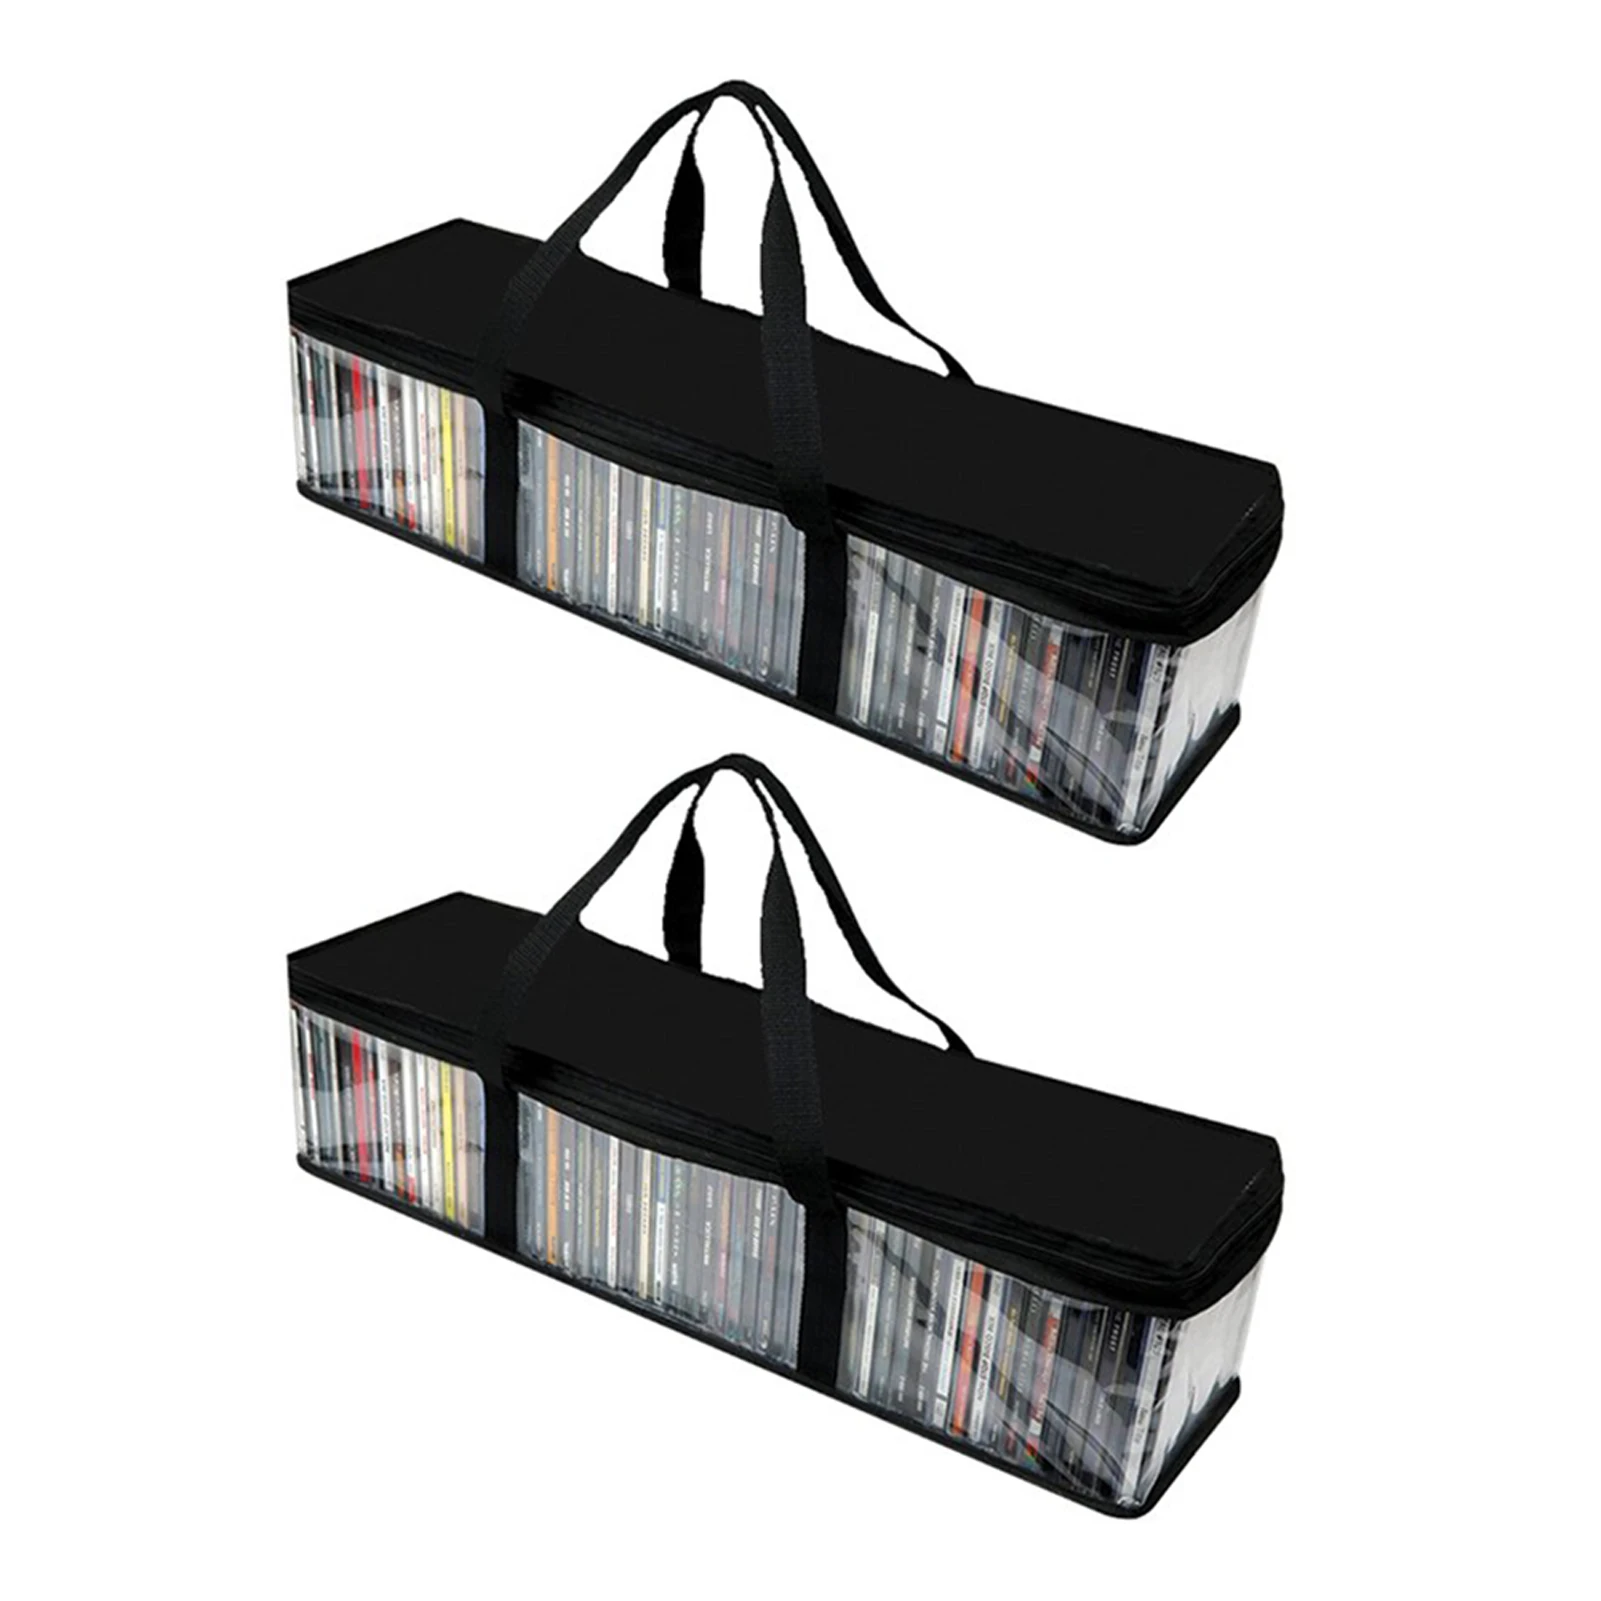 2pcs Home DVD Storage Bag 40 Capacity CD Holder With Handles Protective Zipper Tidy Media Case Clear Windows For Movies Portable